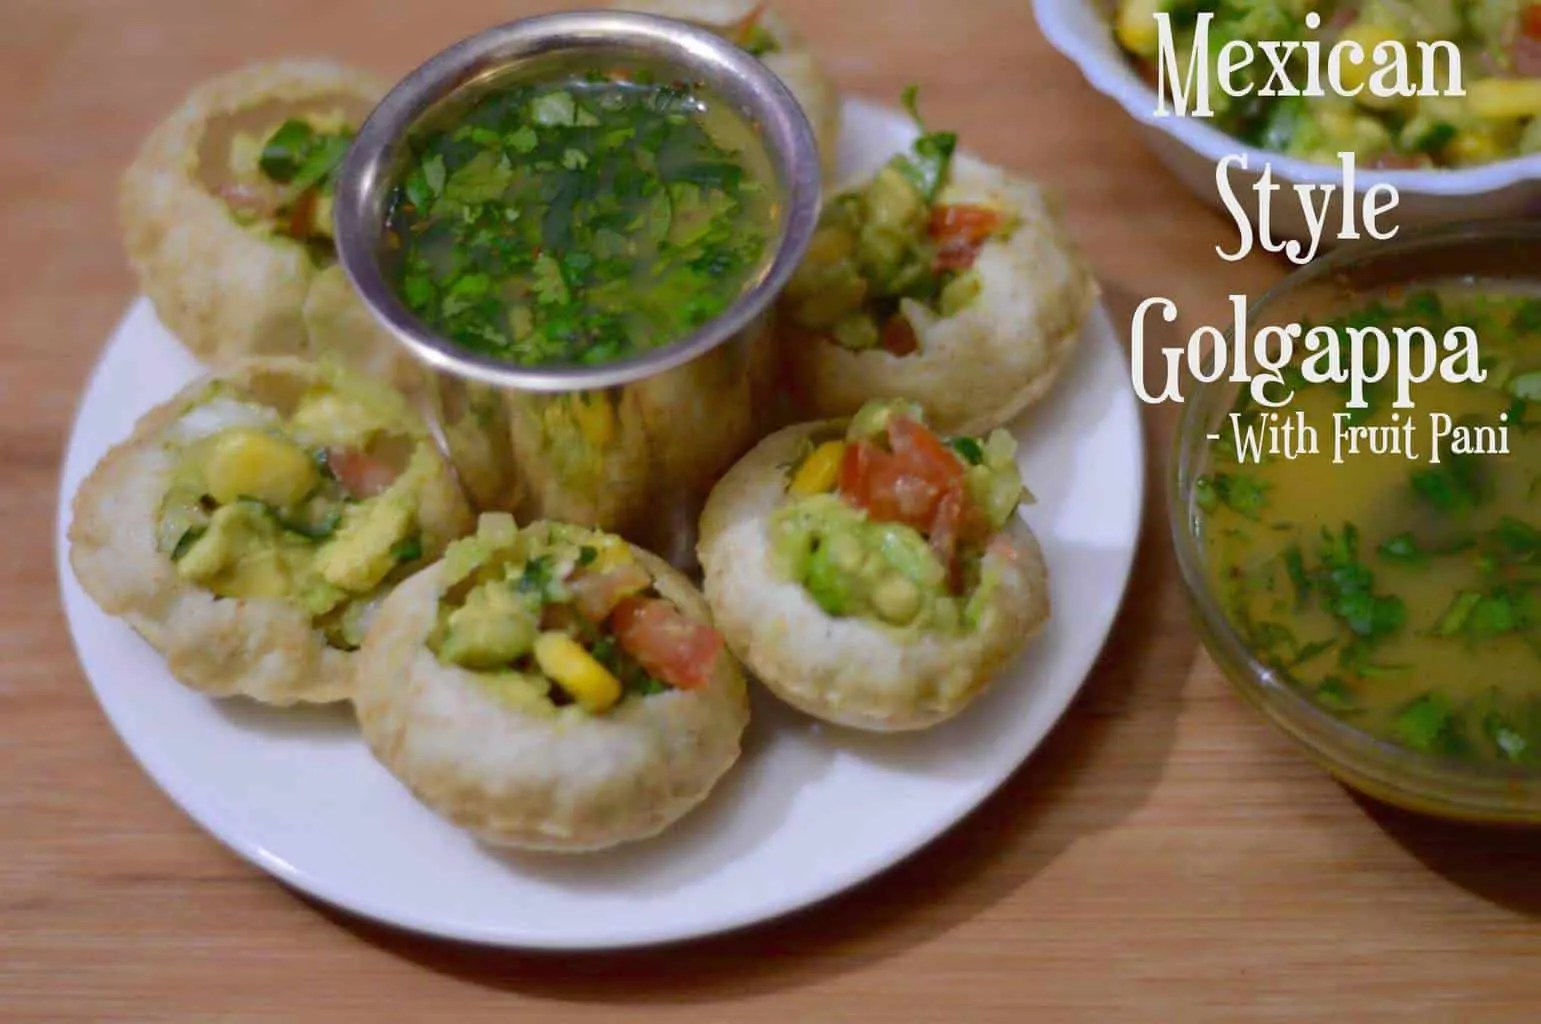 Mexican Style Golgappa with Fruit Pani|Pani Puri Mexican Style is a indo-mexican fusion twist on famous Indian classic street food pani puri.